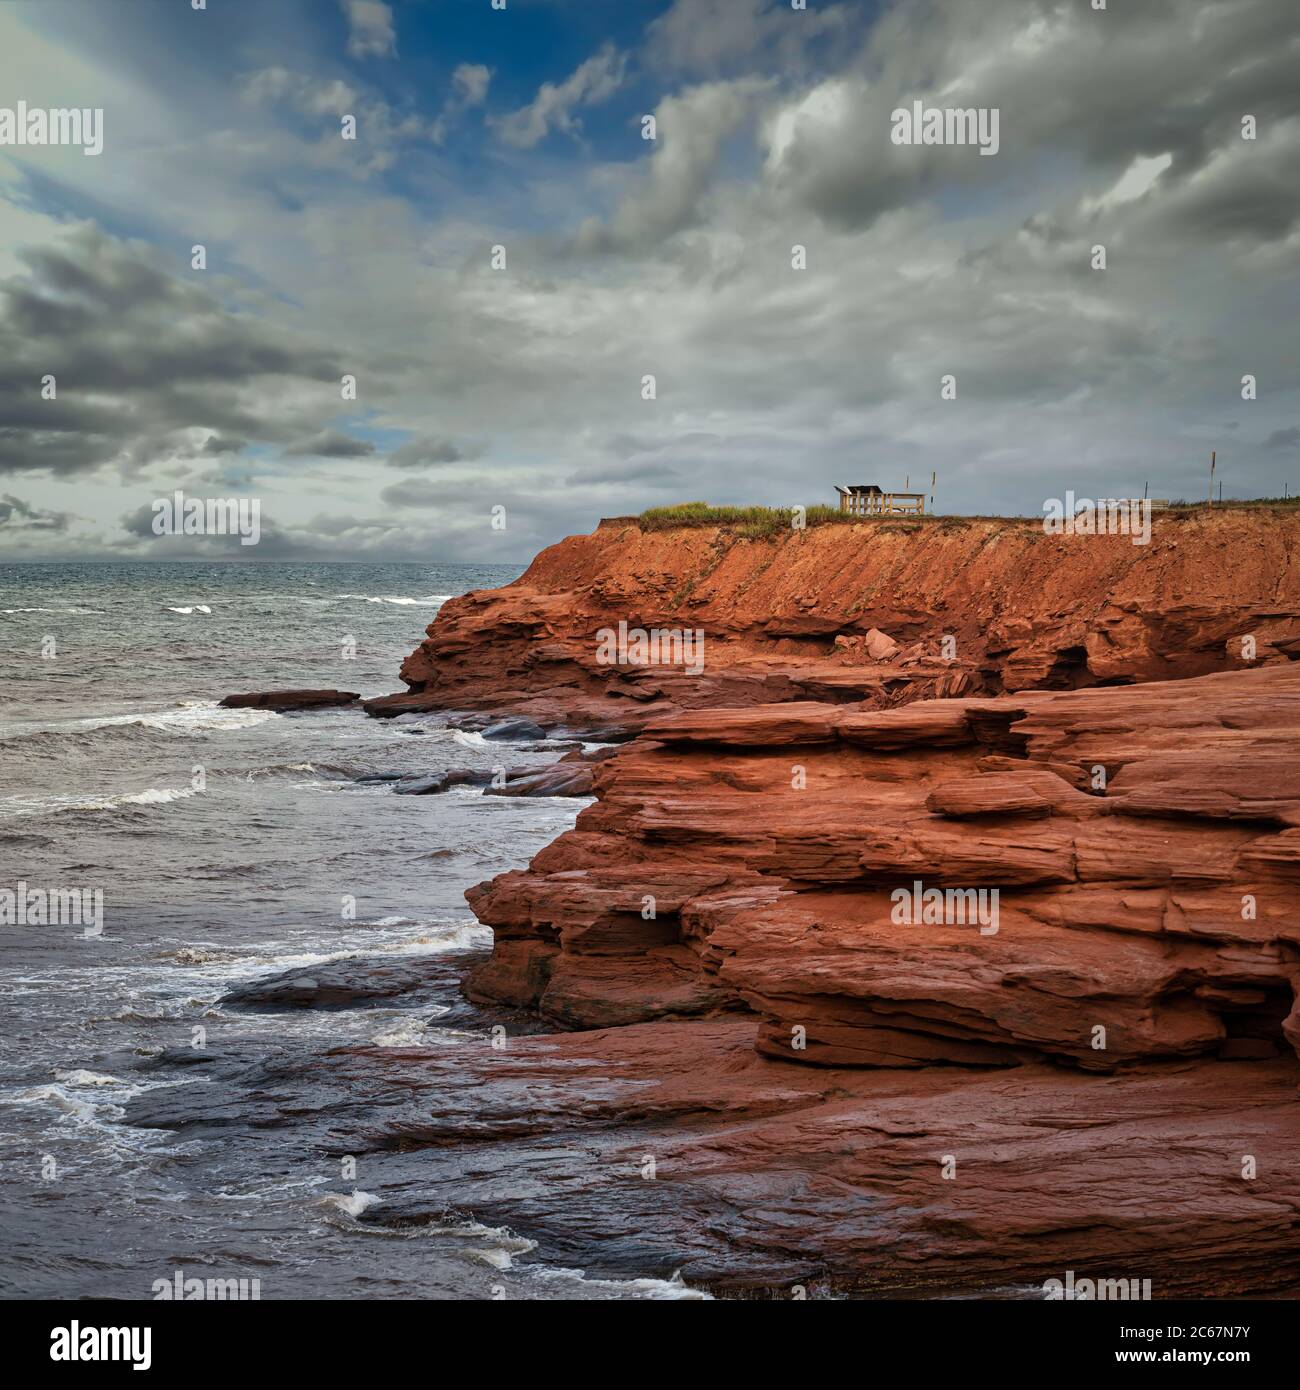 Sandstone cliffs along the north shore of Prince Edward Island, Canada in the PEI National Park. Stock Photo